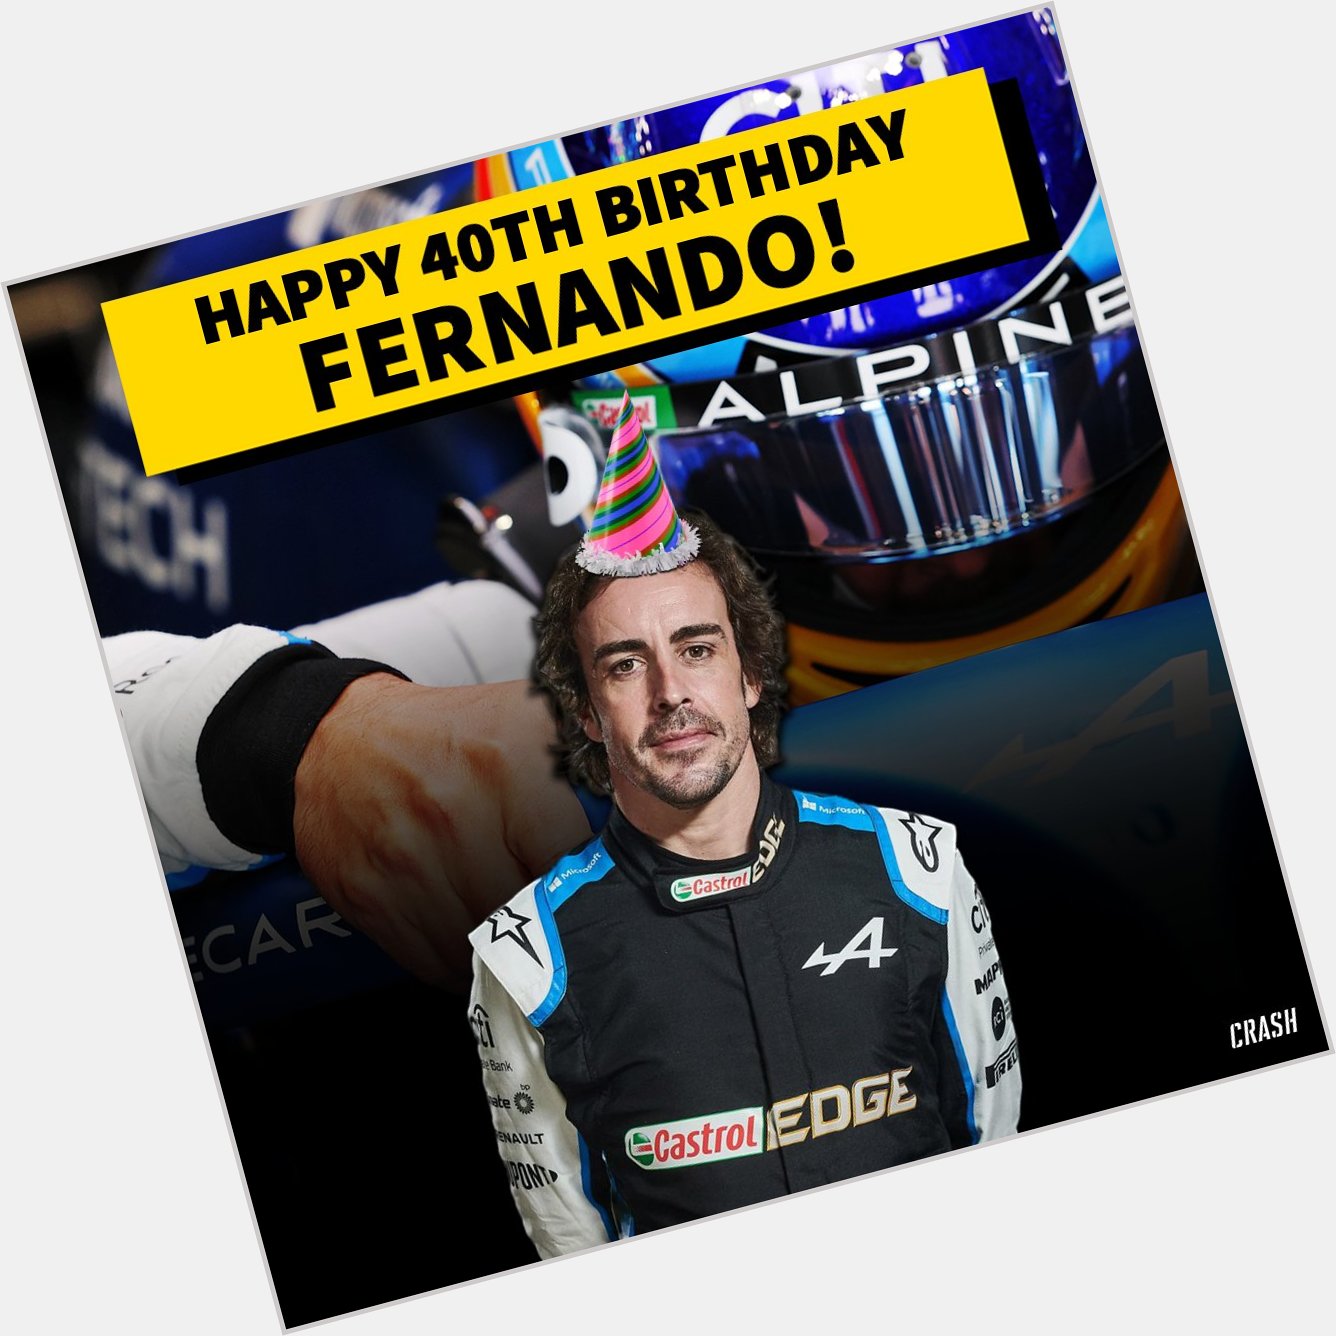 They say life begins at 40 Happy Birthday to Fernando Alonso      